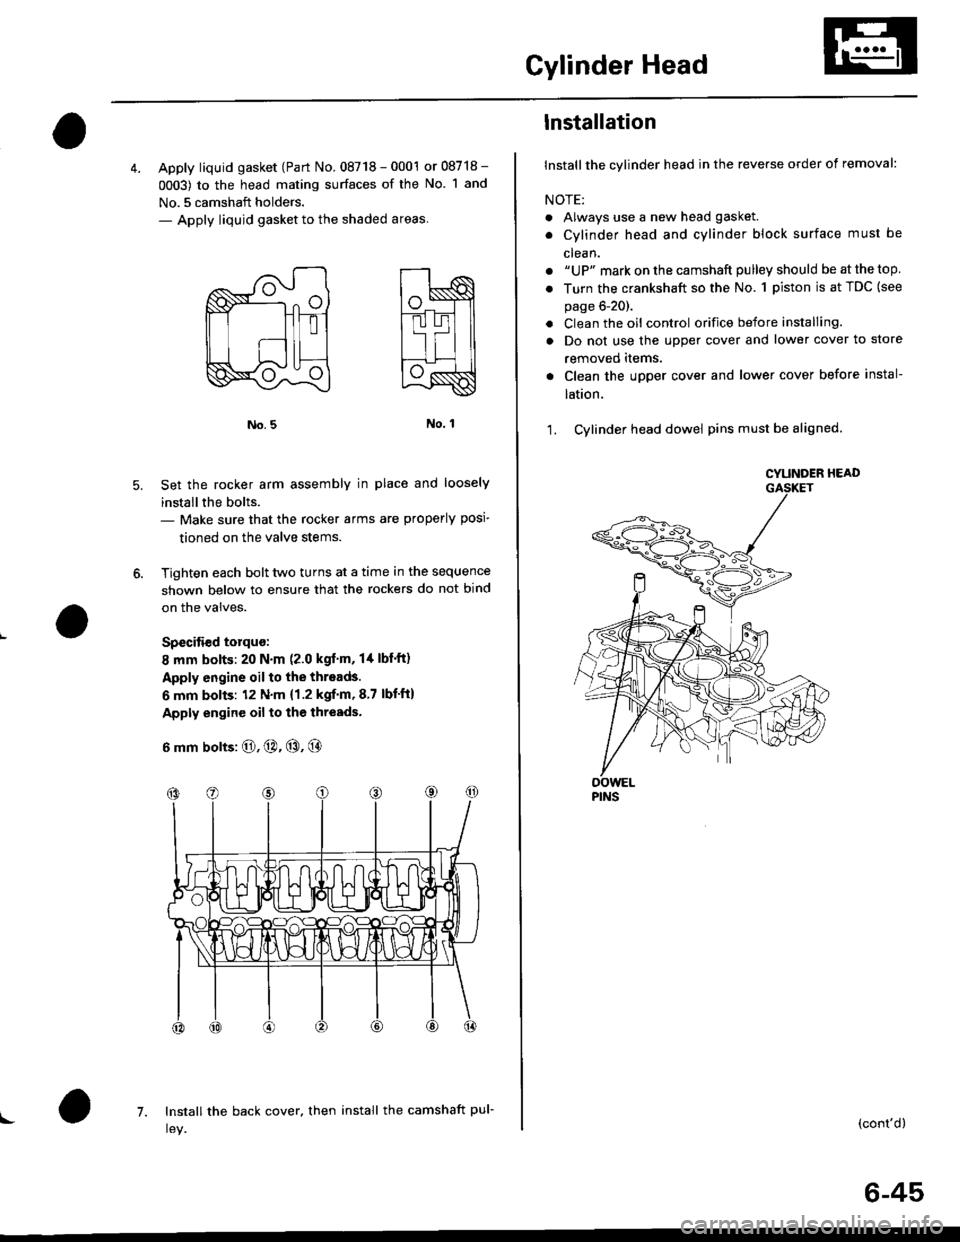 HONDA CIVIC 1996 6.G User Guide Cylinder Head
4. Apply liquid gasket (Part No. 08718 - 0001 or 08718 -
0003) to the head mating surfaces of the No. 1 and
No.5 camshaft holders.- Apply liquid gasket to the shaded areas
Set the rocker